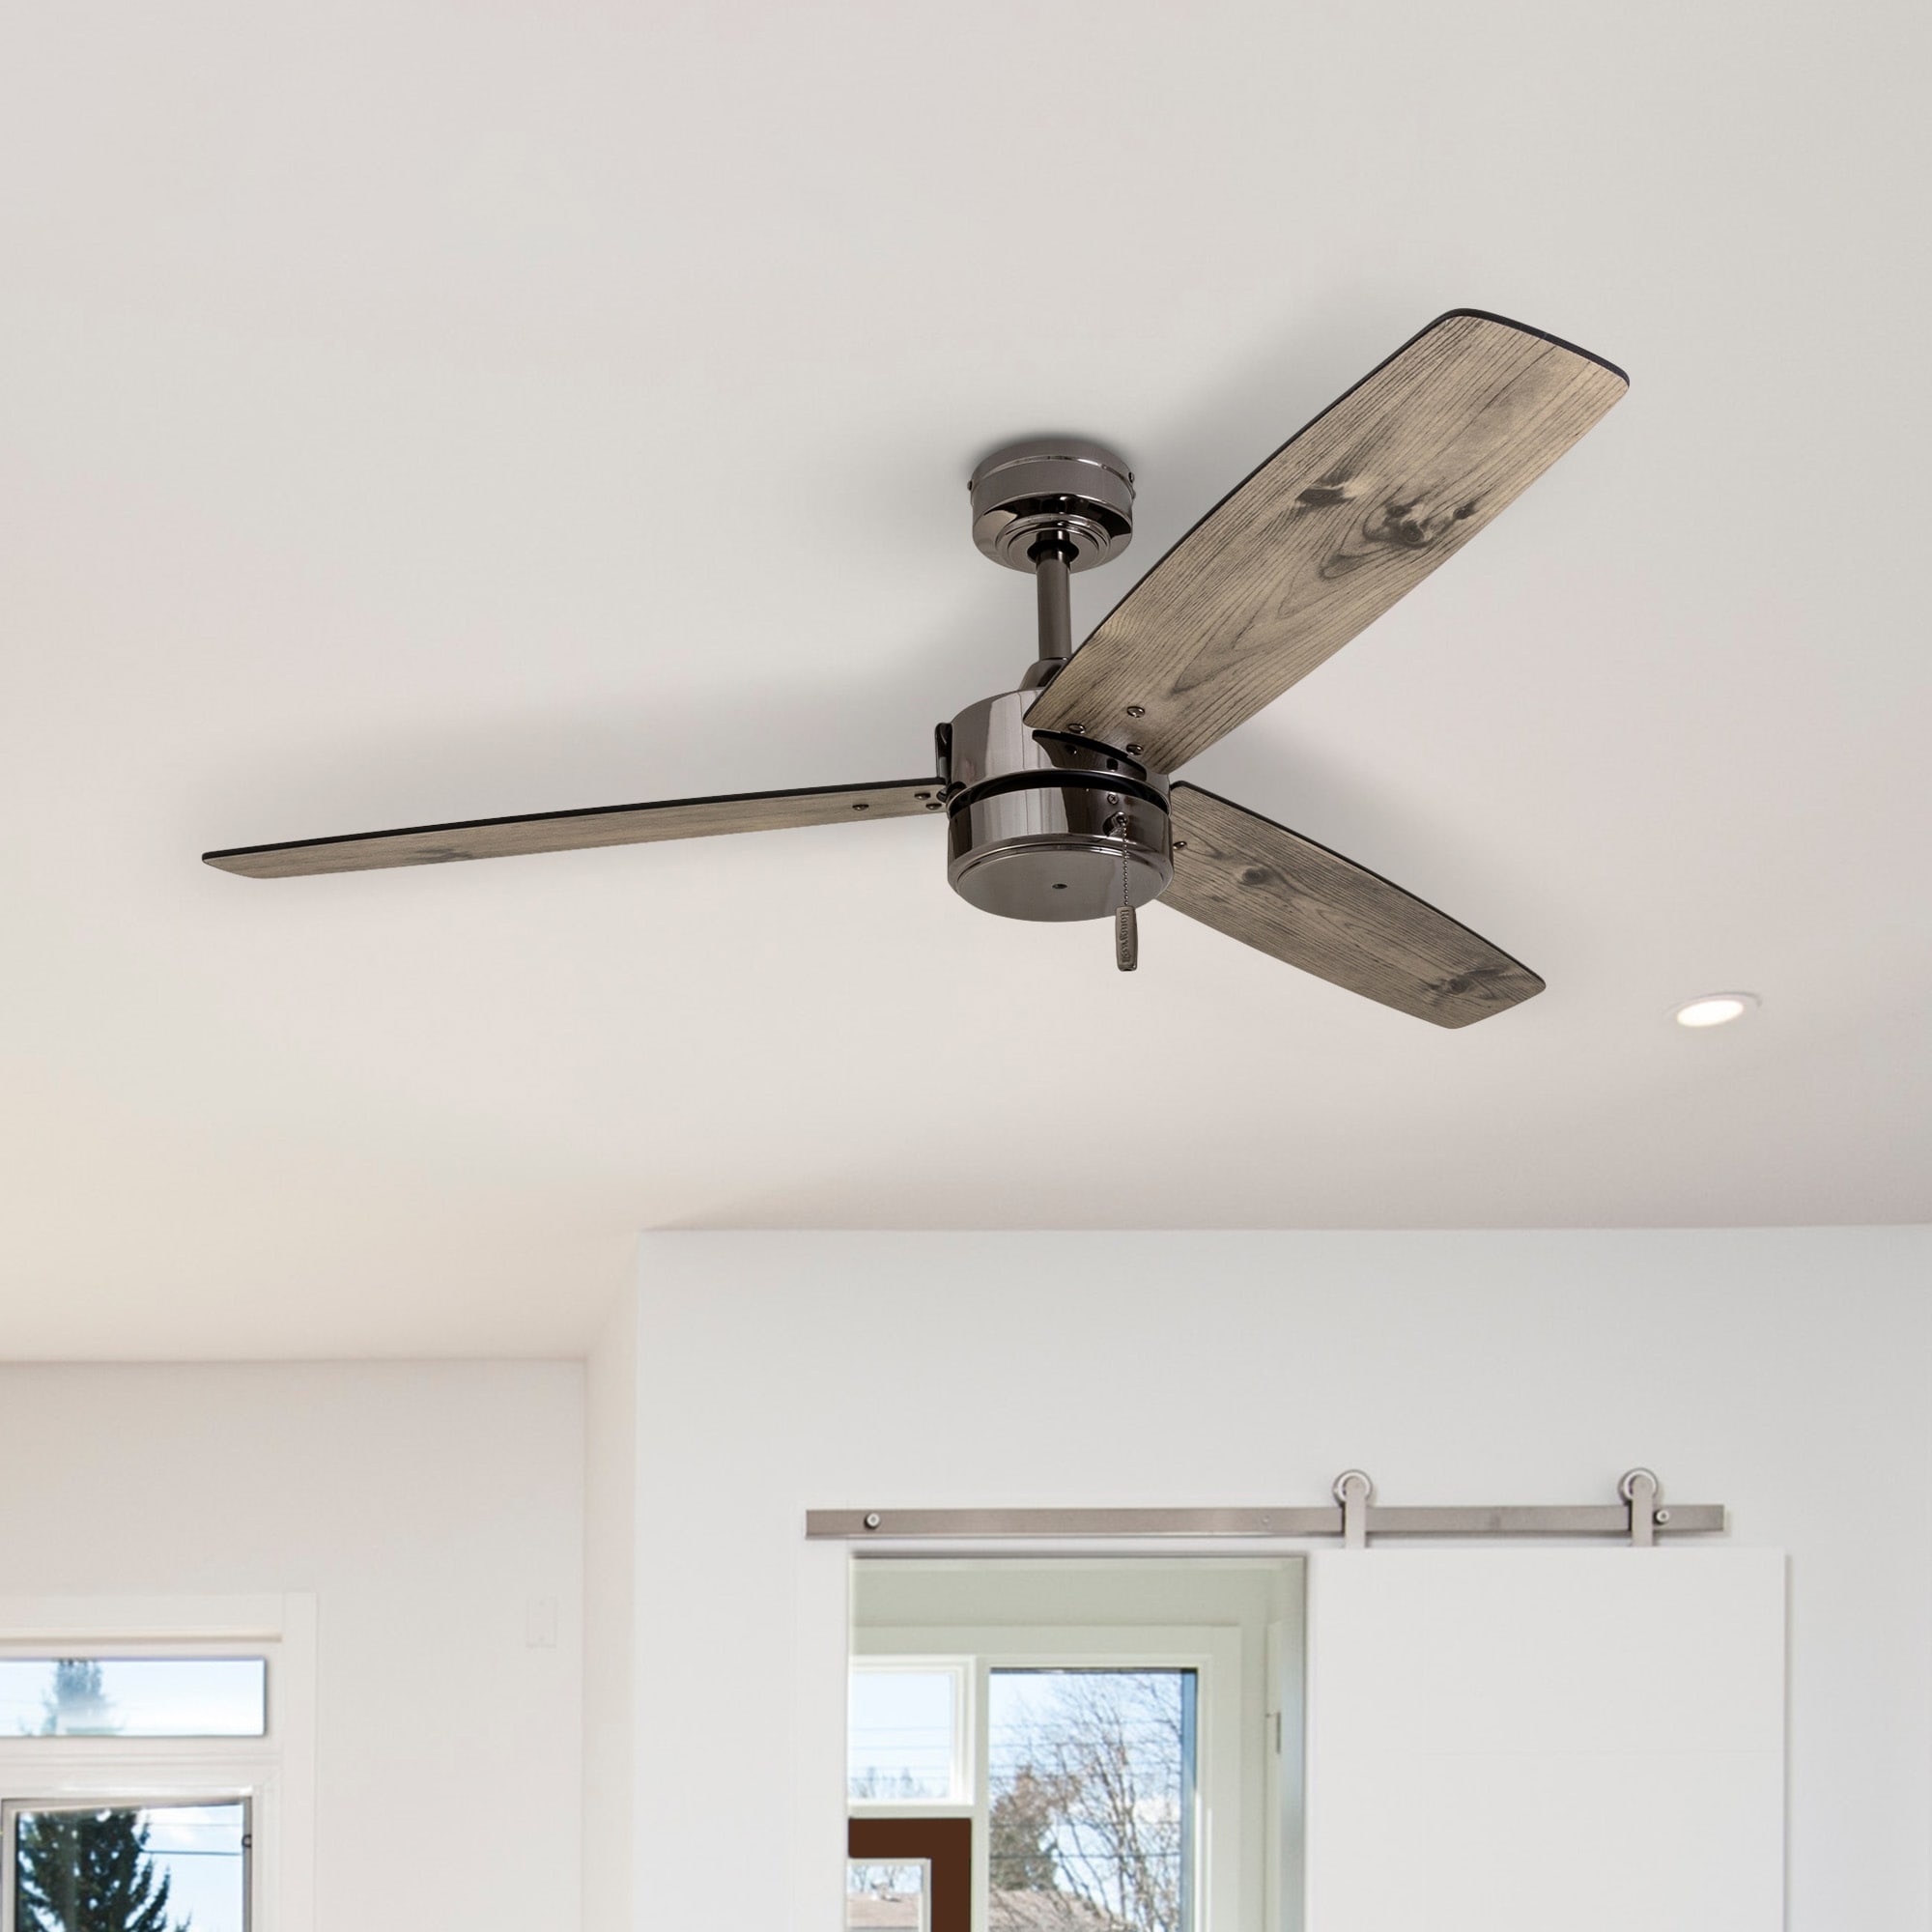 Prominence Home Journal Indoor/Outdoor Ceiling Fan, Damp Rated, Contemporary, Gun Metal - 52-inch